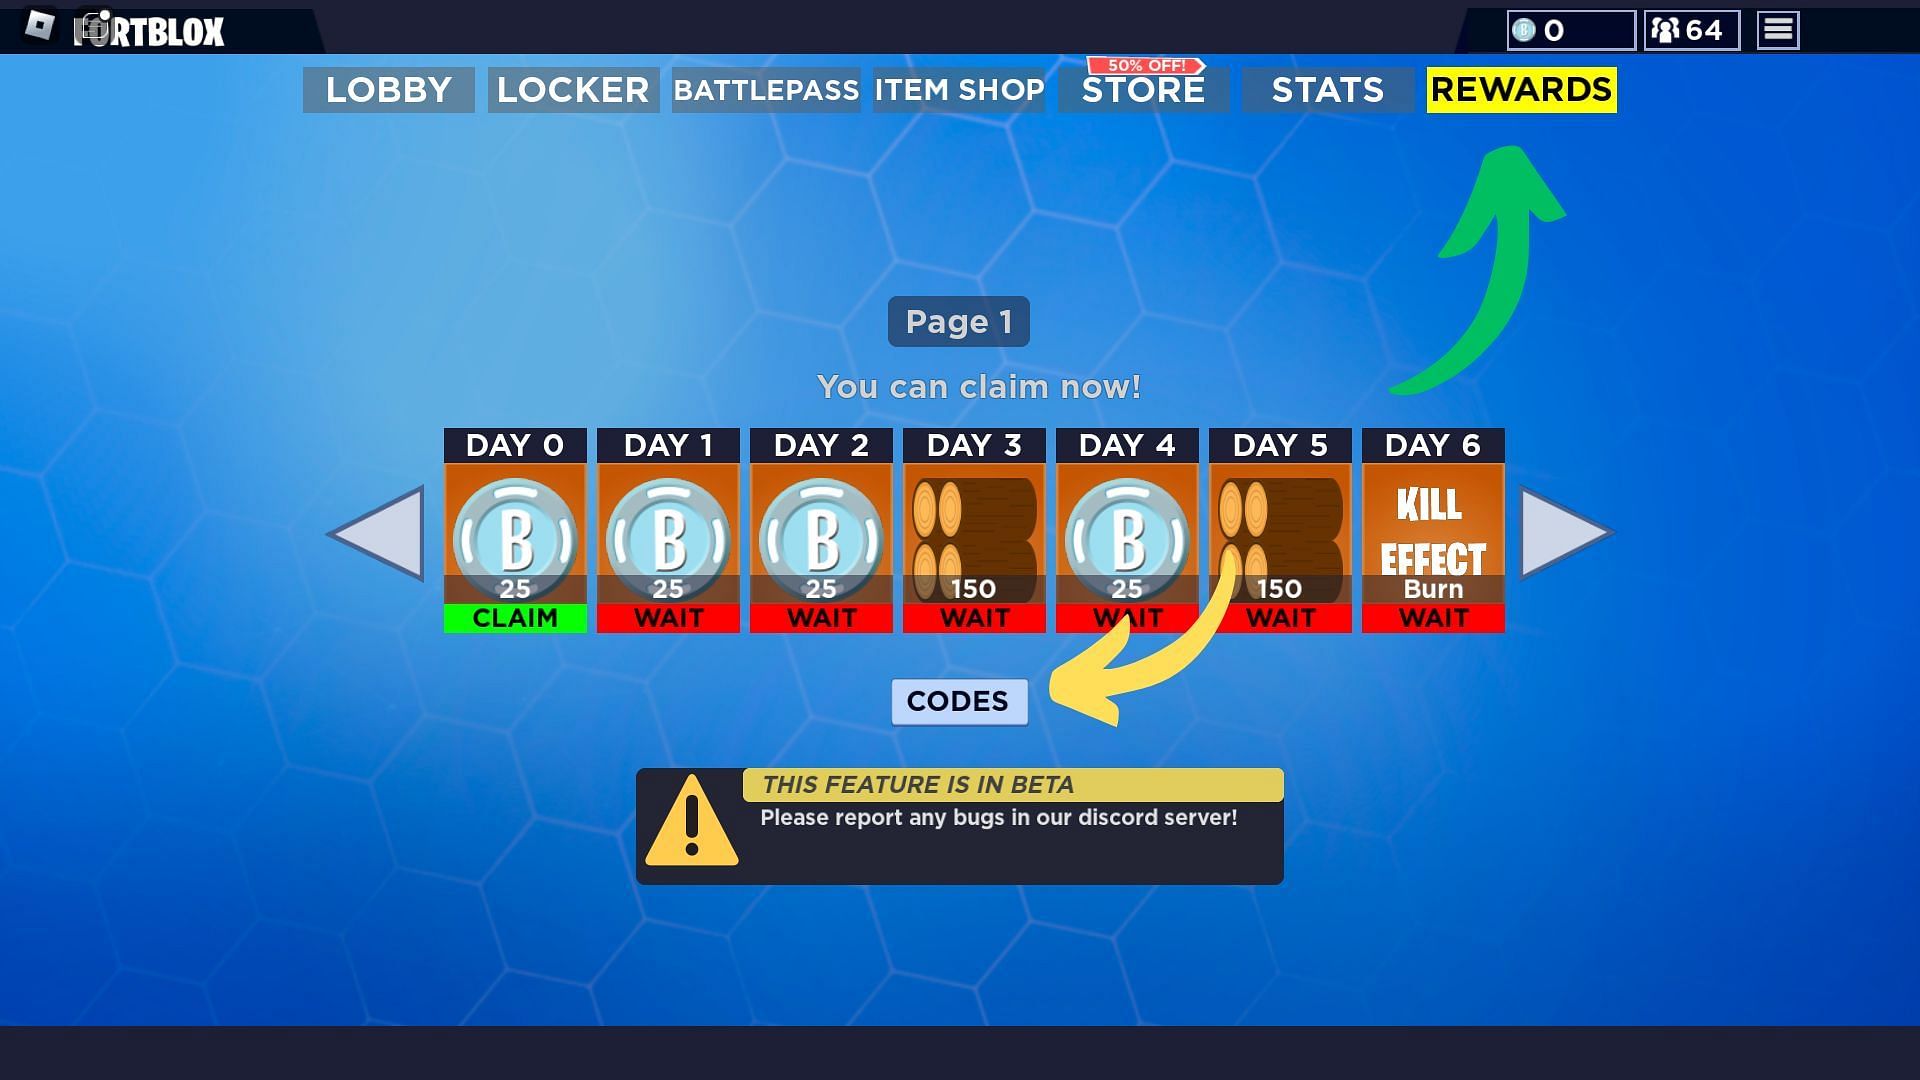 How to redeem codes for Fortblox (Image via Roblox and Sportskeeda)